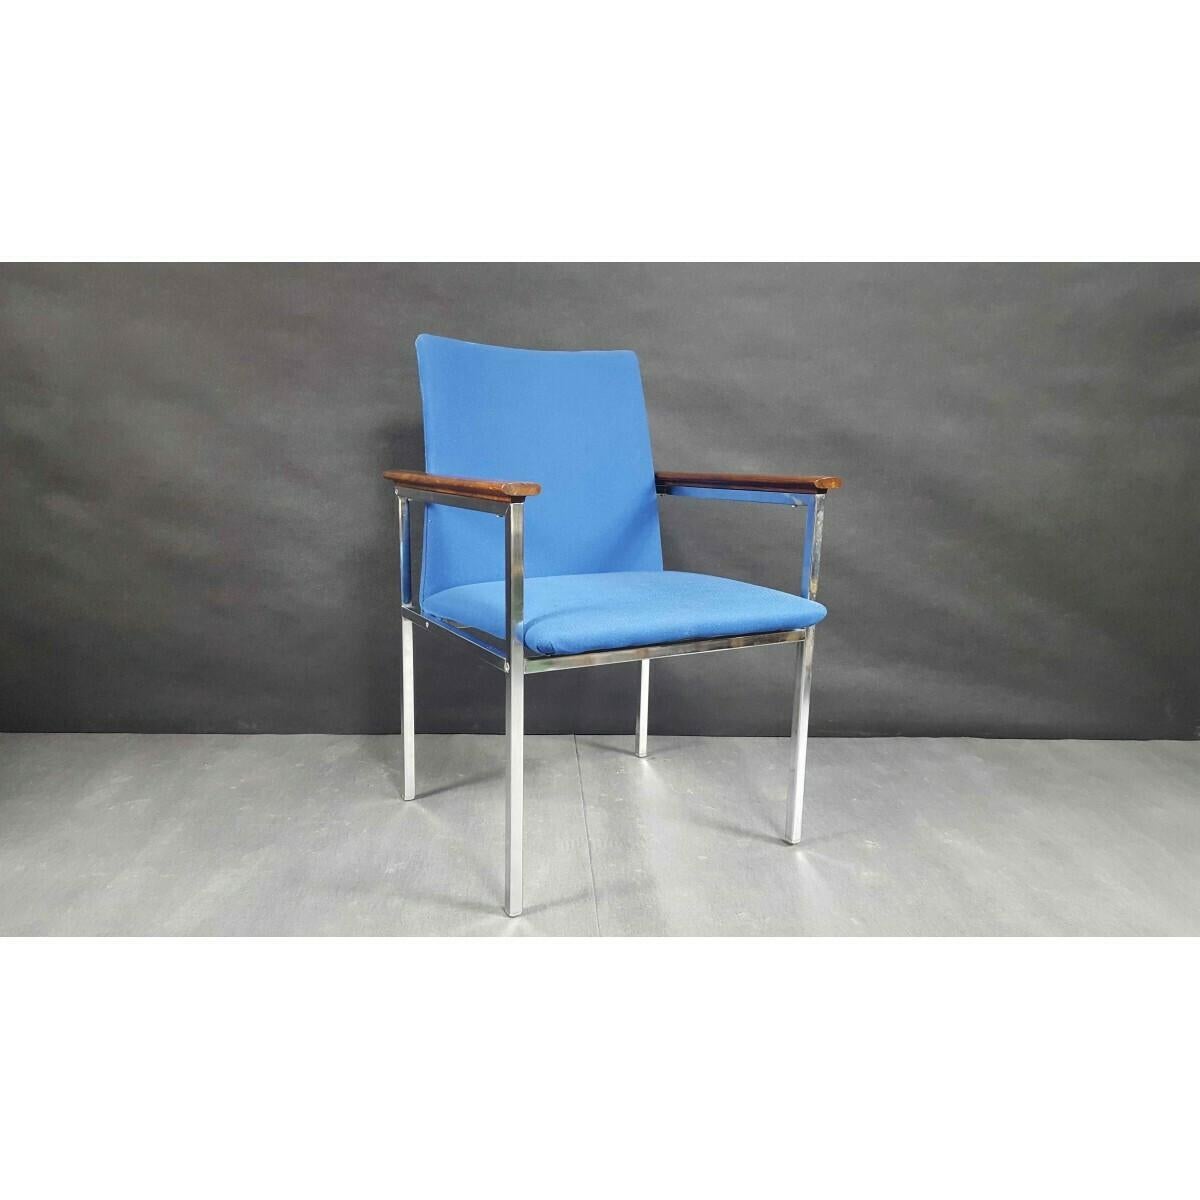 Scandinavian Mid-Century Modern armchair. 
Designed by renowned Swedish designer Sigvard Bernadotte and produced by Danish manufacturer France & Son.
A chromed steel frame with wooden armrests.
Armchair will be unfolded fot the shipping.